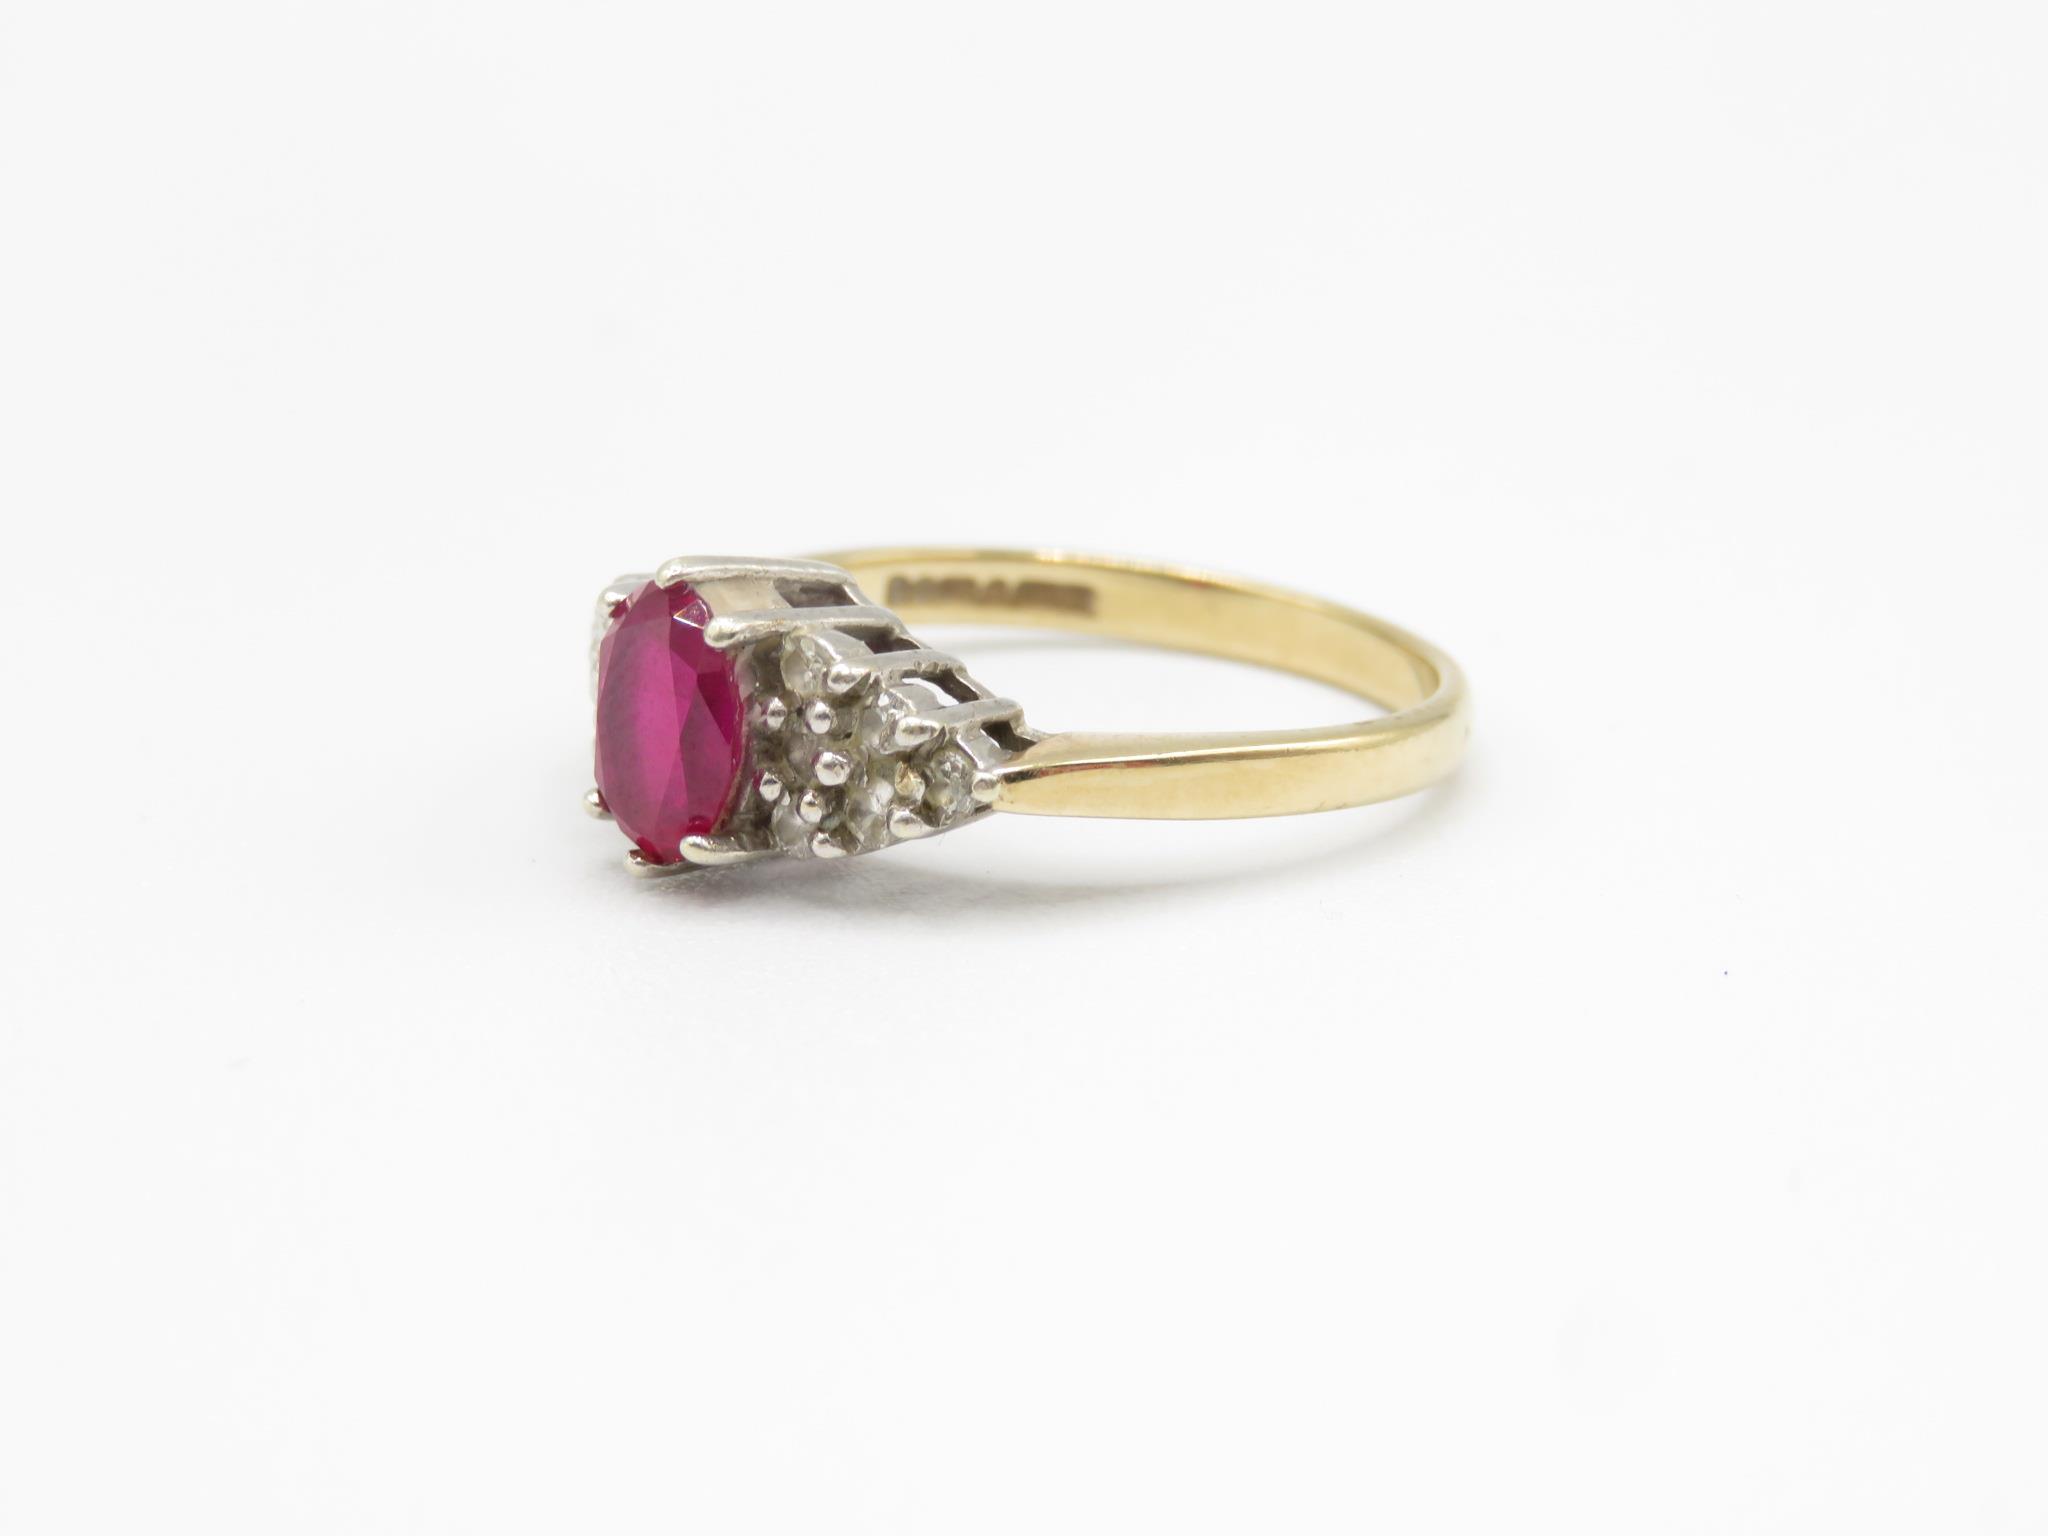 9ct Gold Diamond & Synthetic Ruby Dress Ring (2.9g) Size N.5 - Image 3 of 4